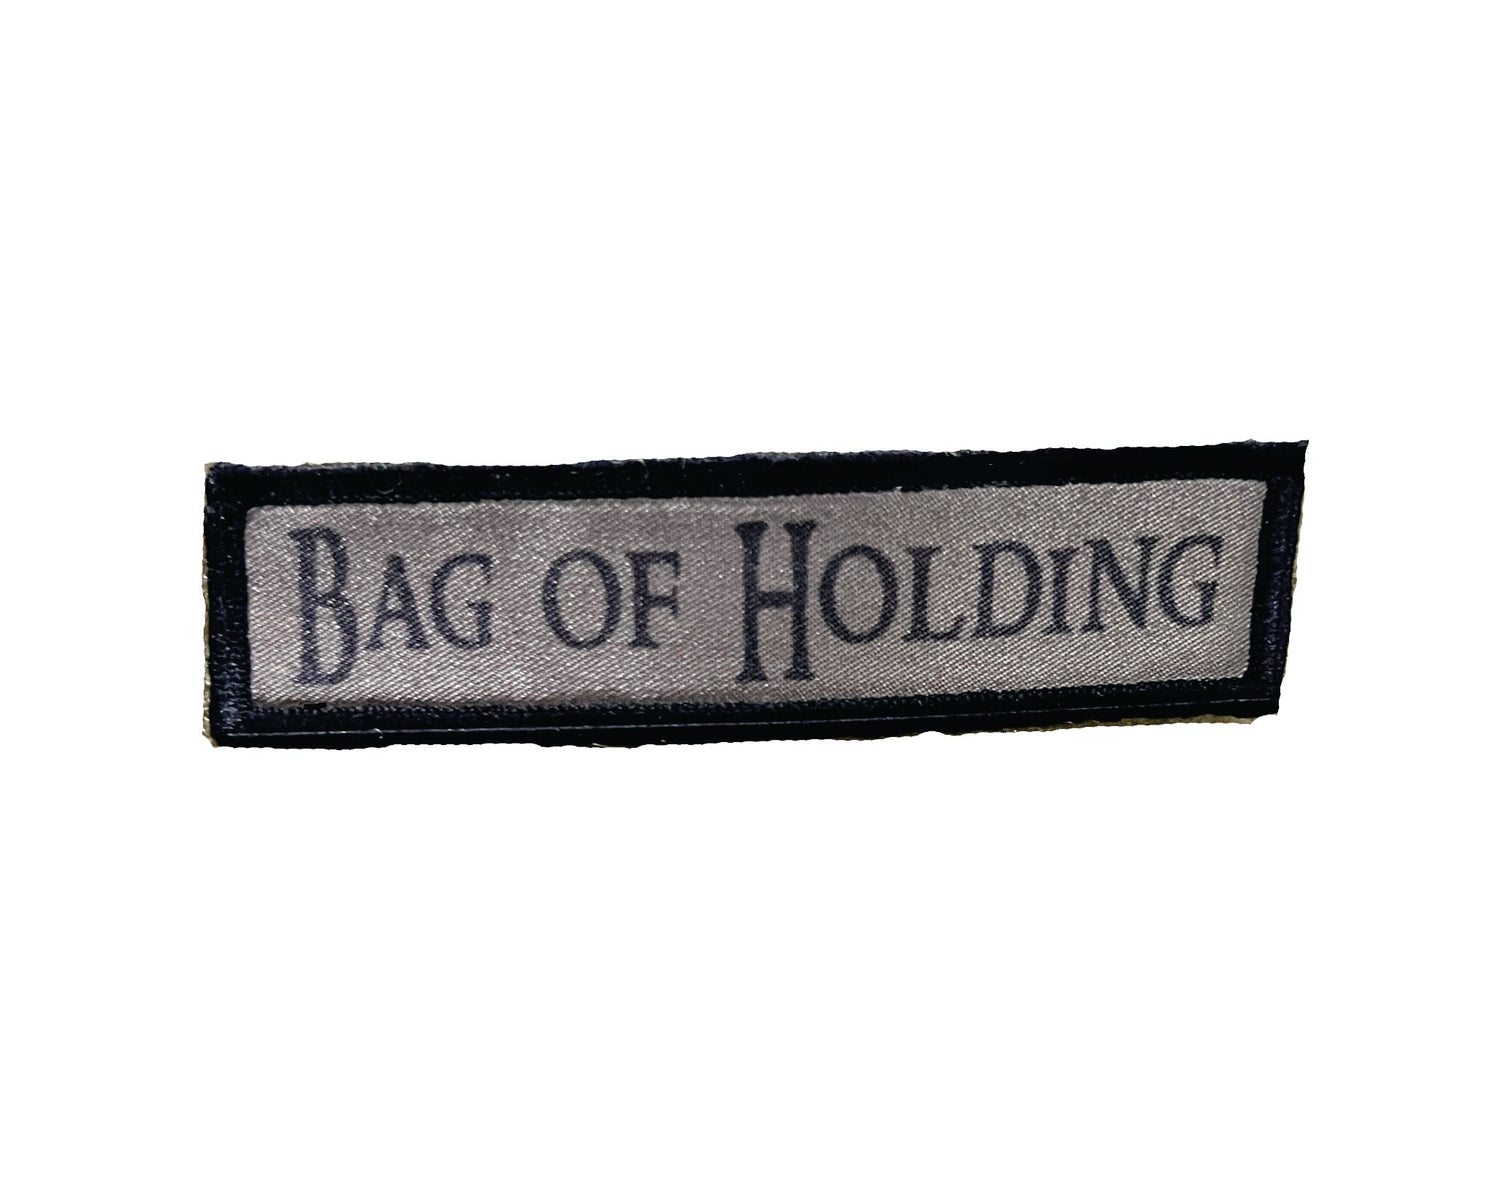 bag of holding dungeons and dragons velcro morale patch